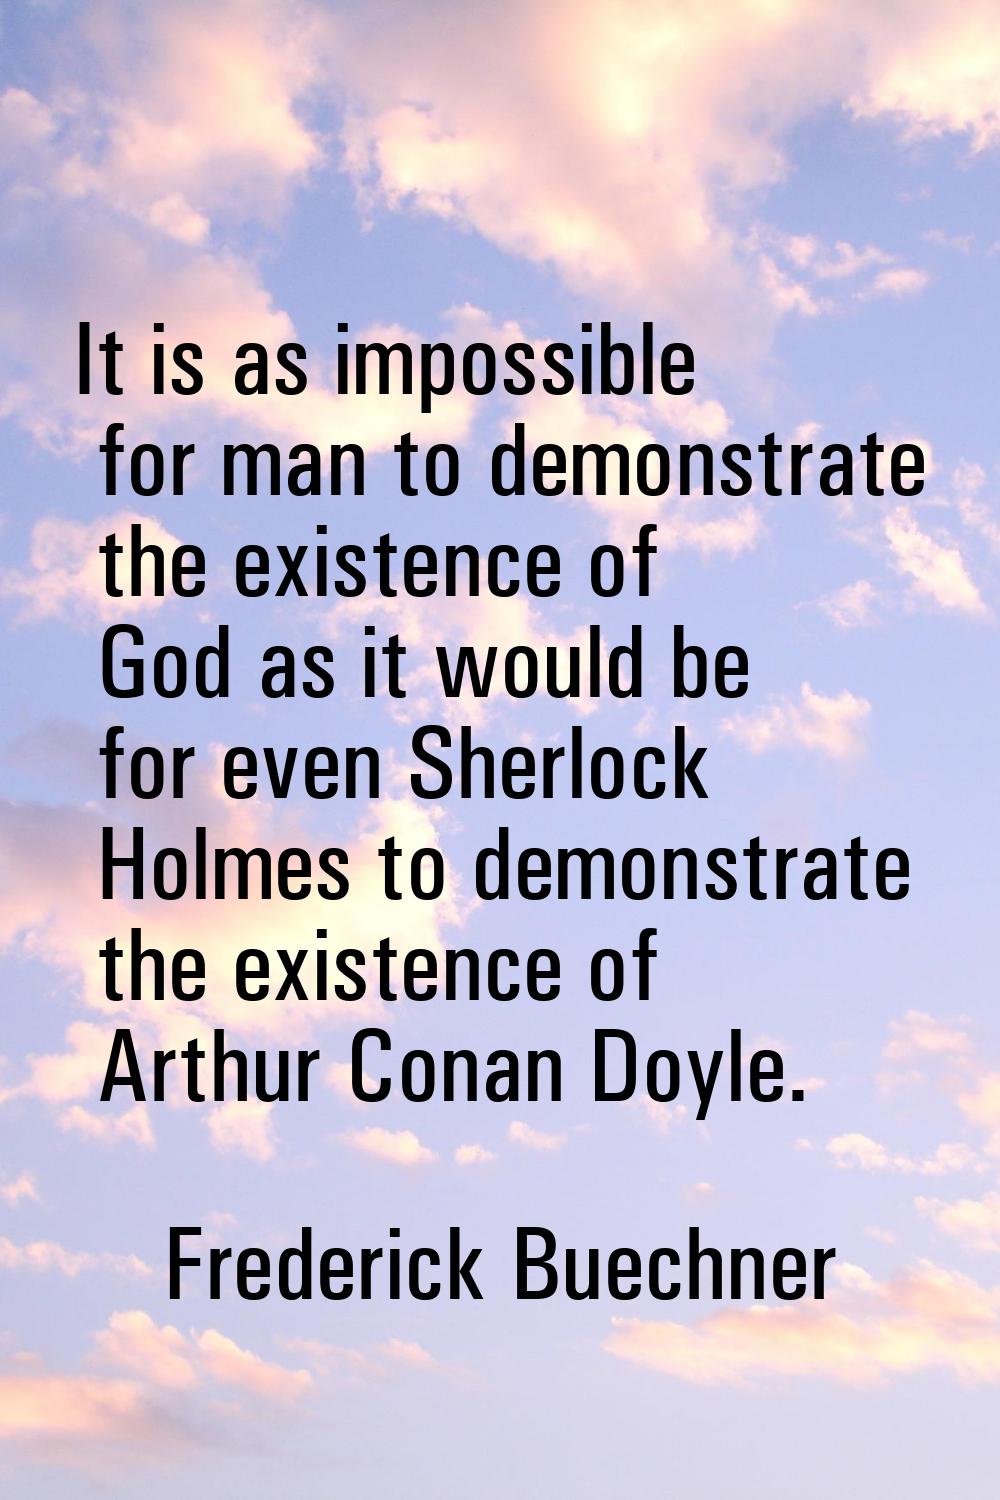 It is as impossible for man to demonstrate the existence of God as it would be for even Sherlock Ho